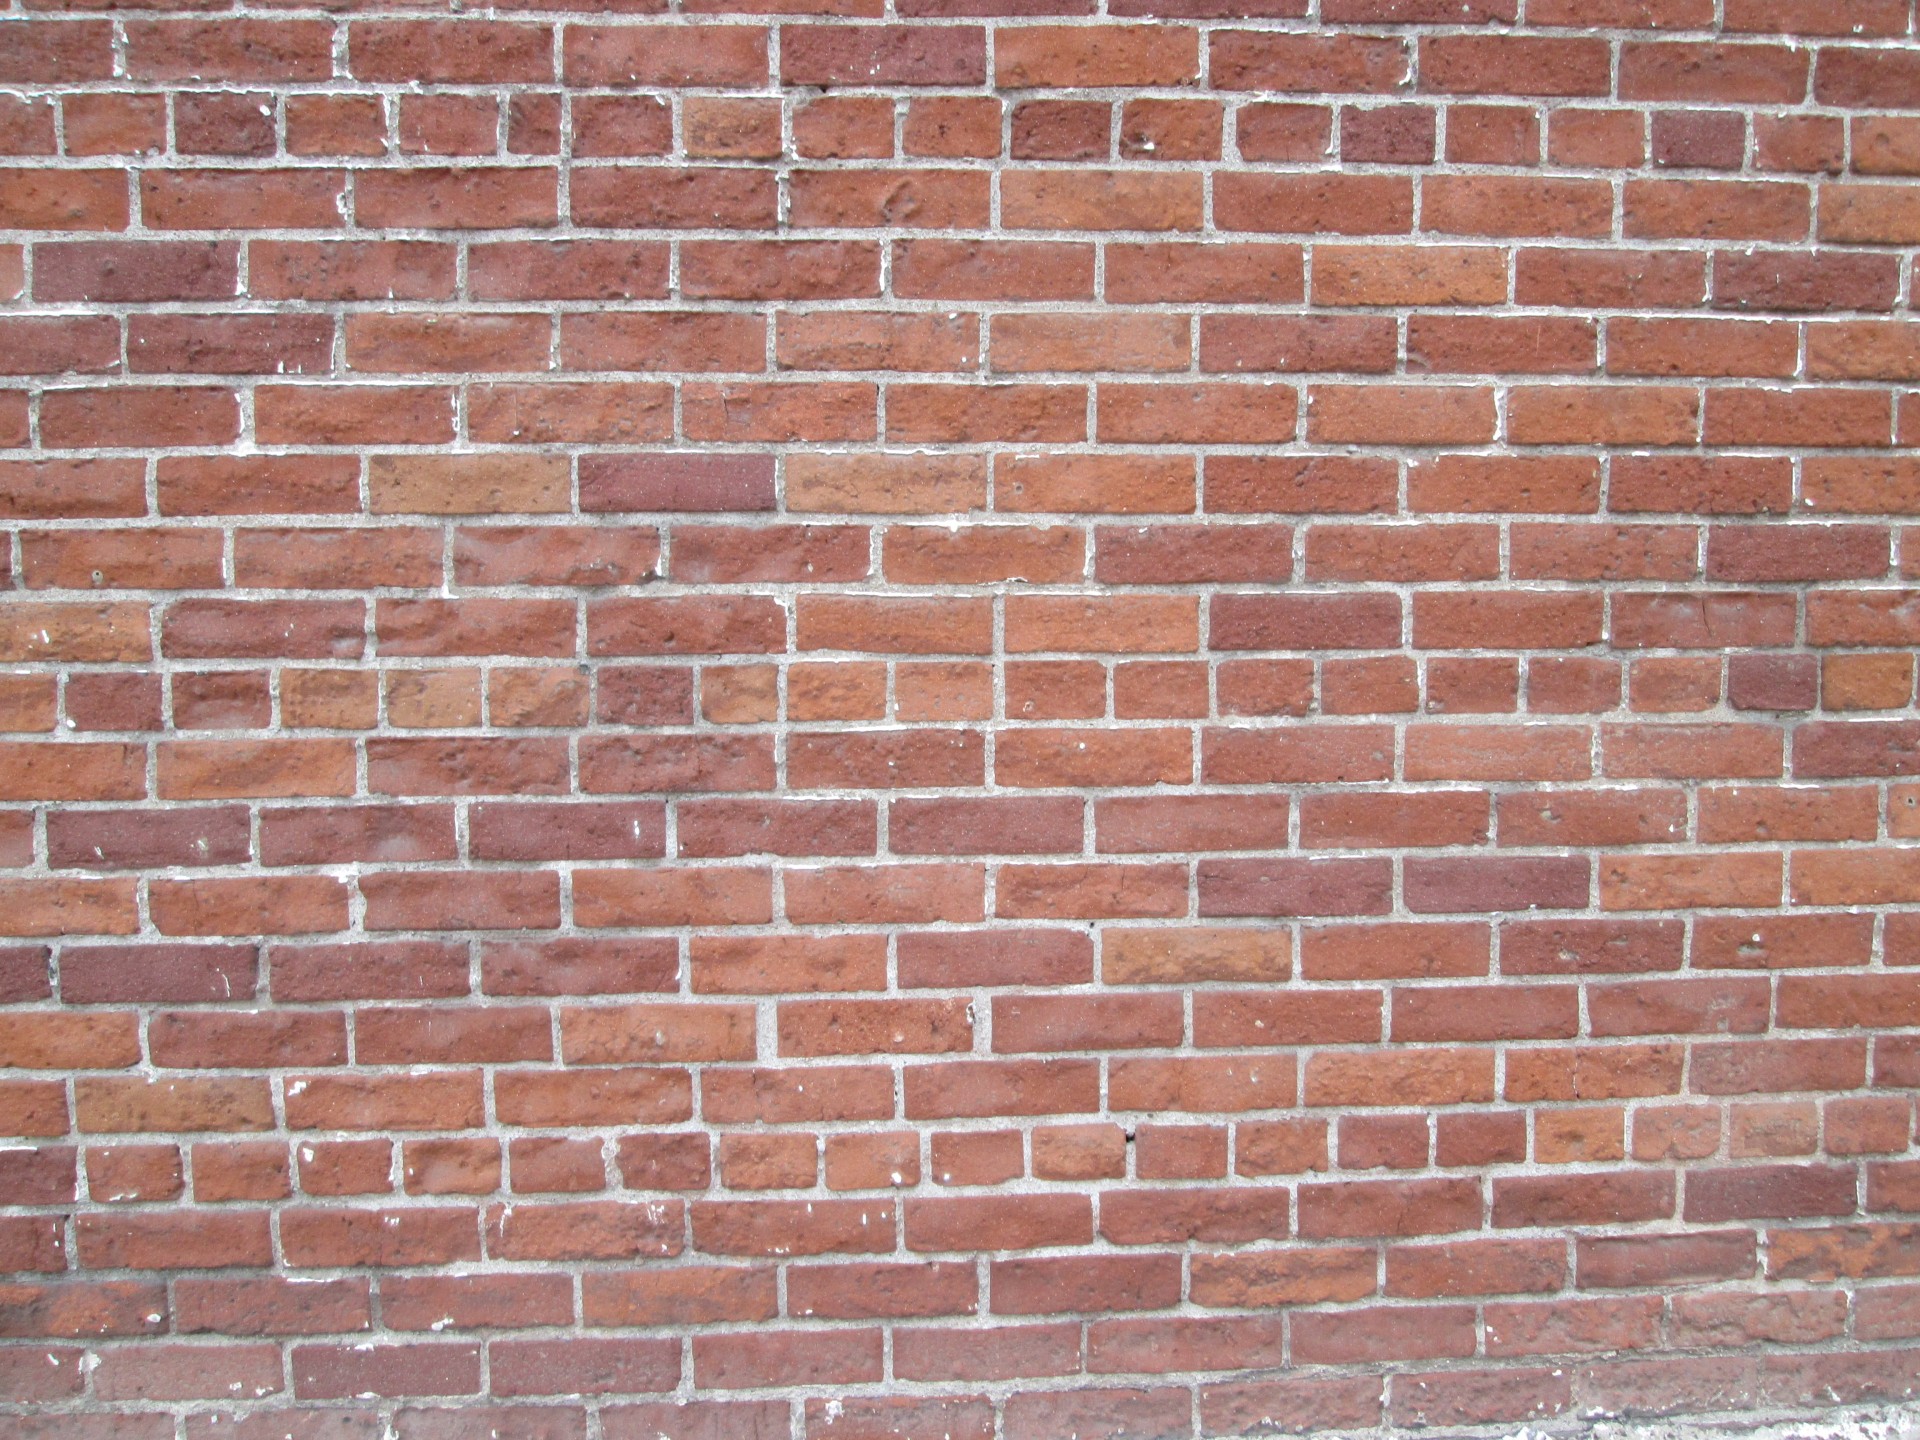 Brick Pattern 10 Free Stock Photo - Public Domain Pictures